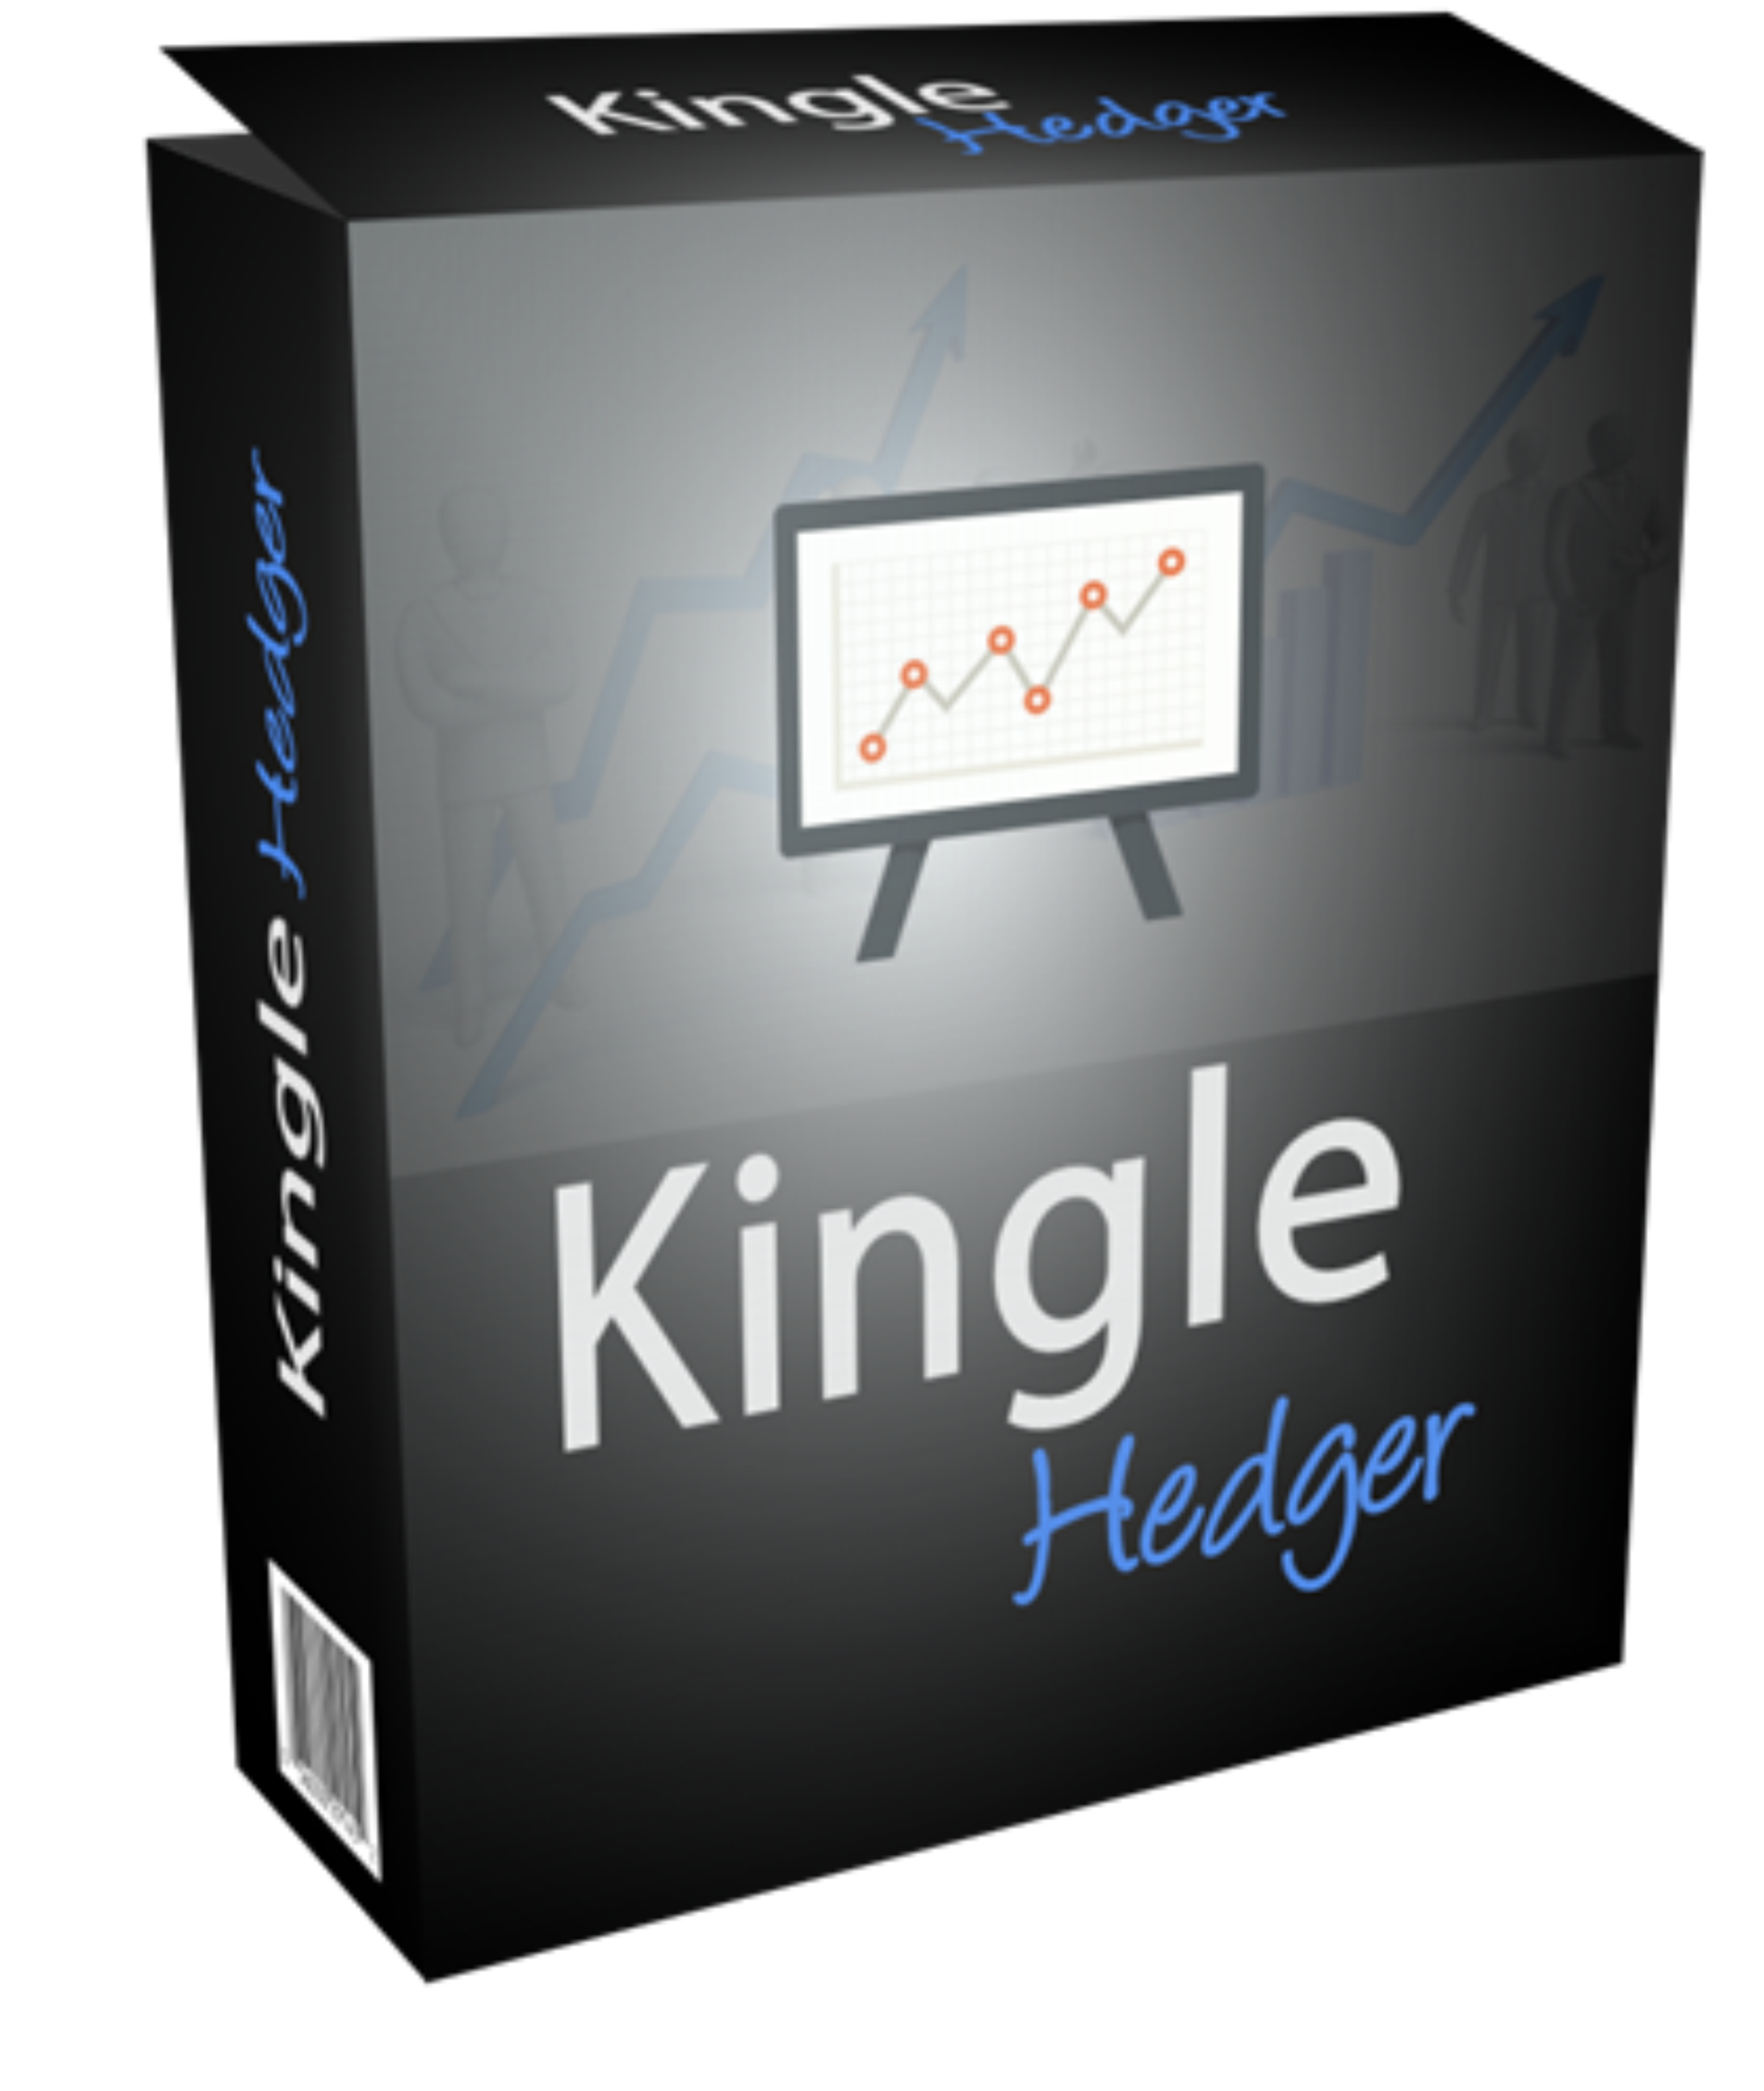  ForexKingle HEDGER - The KING of HEDGING 